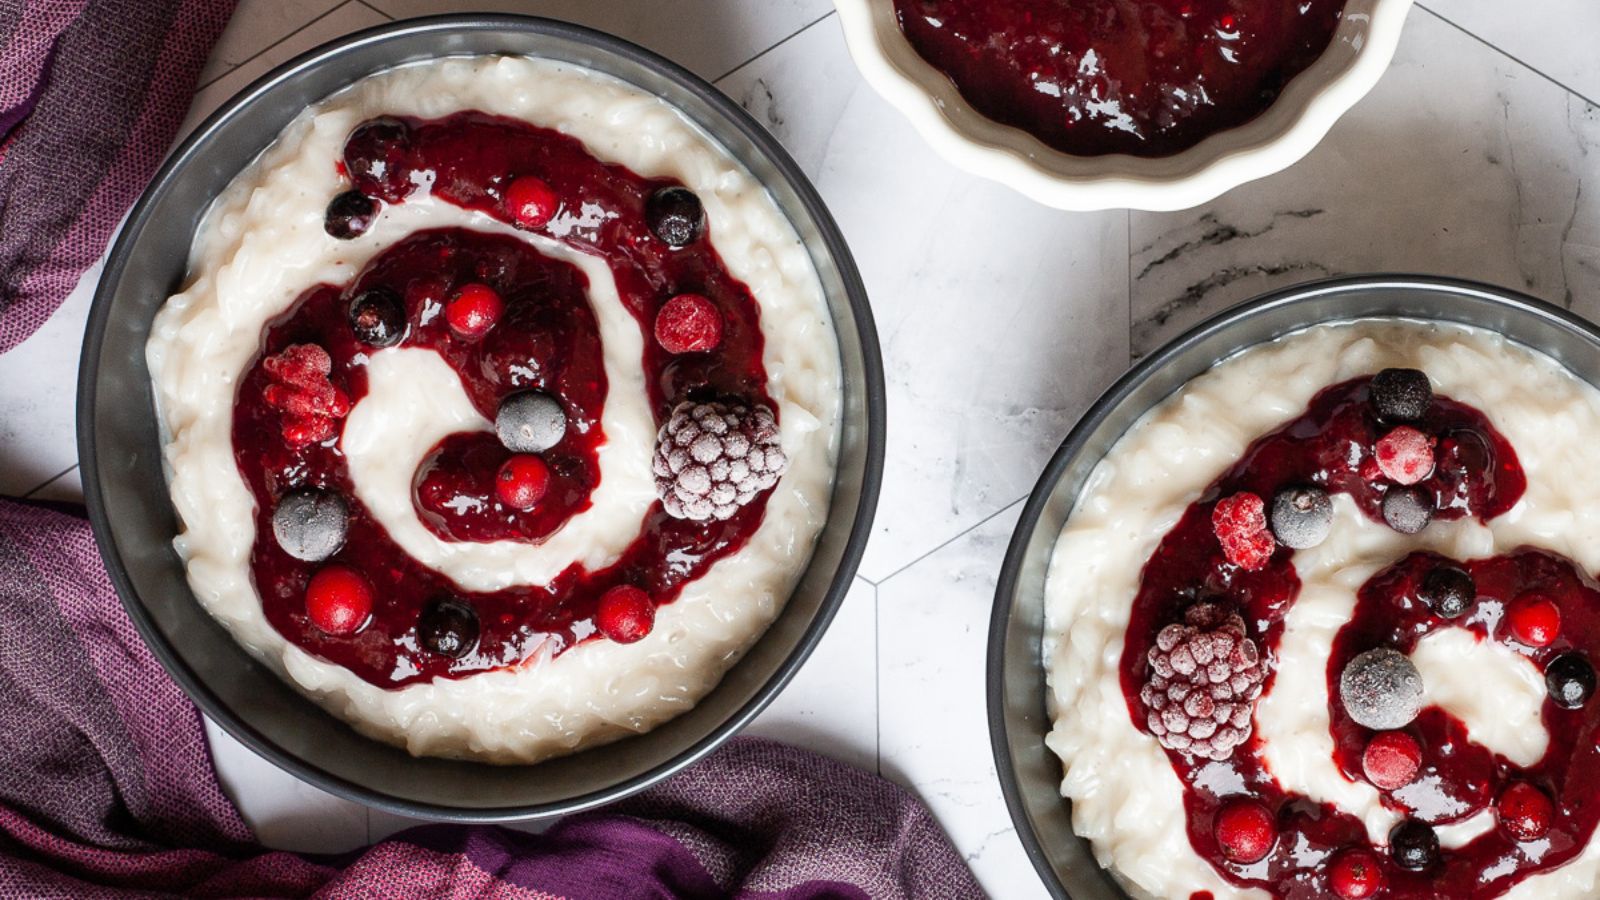 Discover 20 Simple & Delicious Desserts Using Just 5 Ingredients or Fewer!